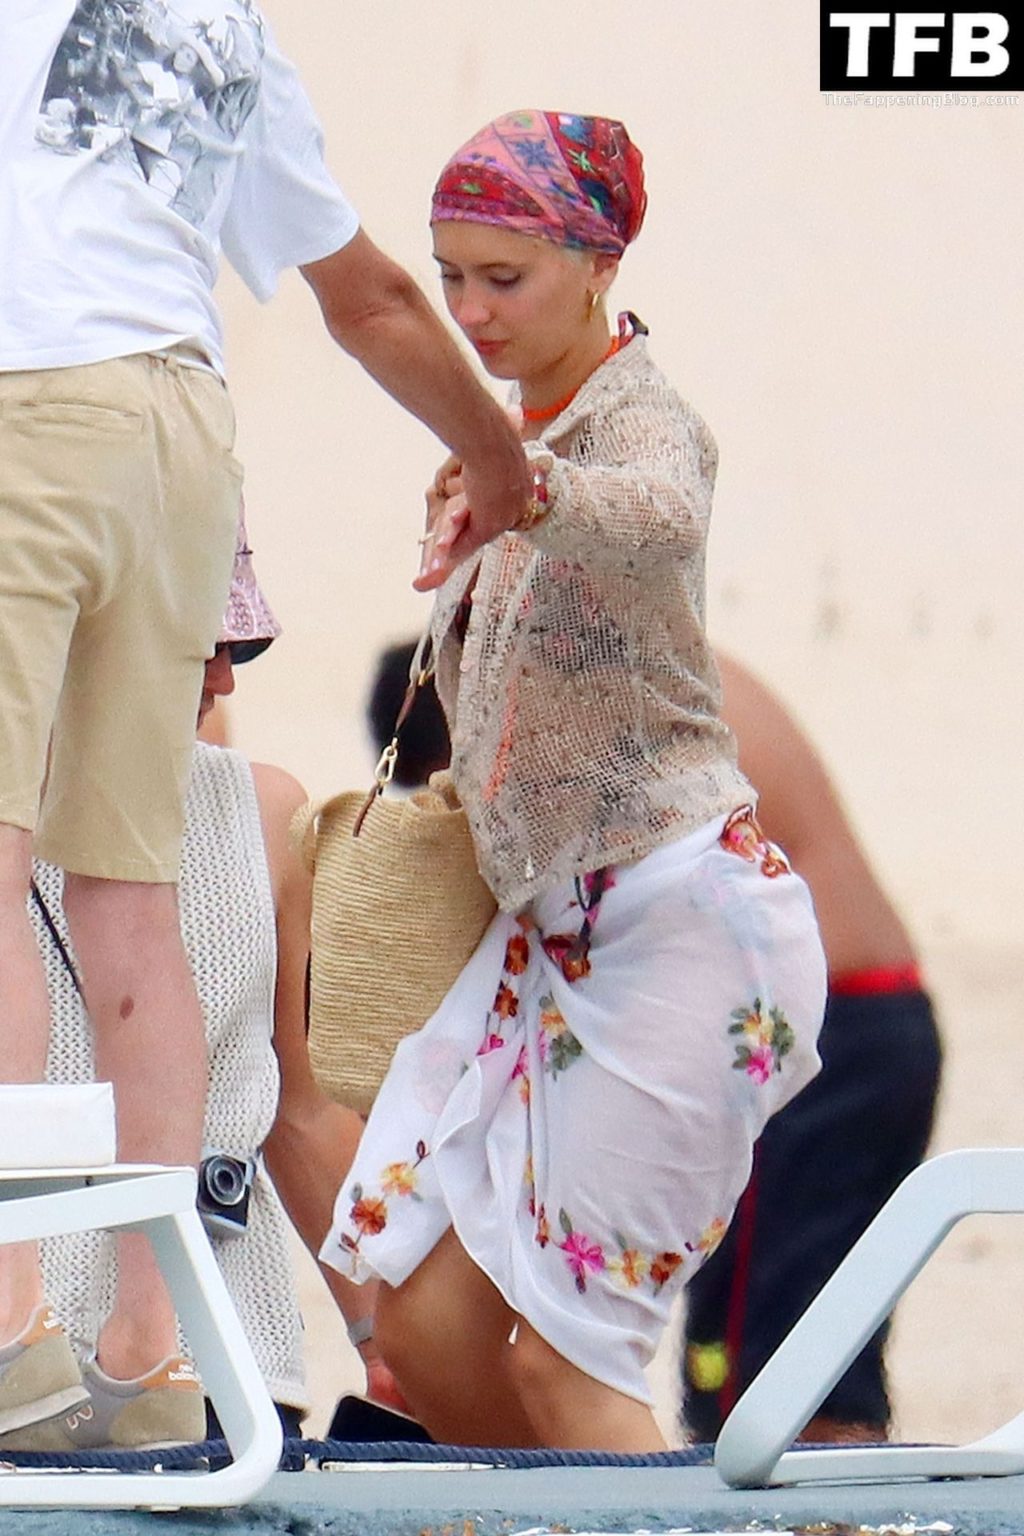 Iris Law is Pictured Posing for Selfies and Having Fun on a Boat (26 Photos)